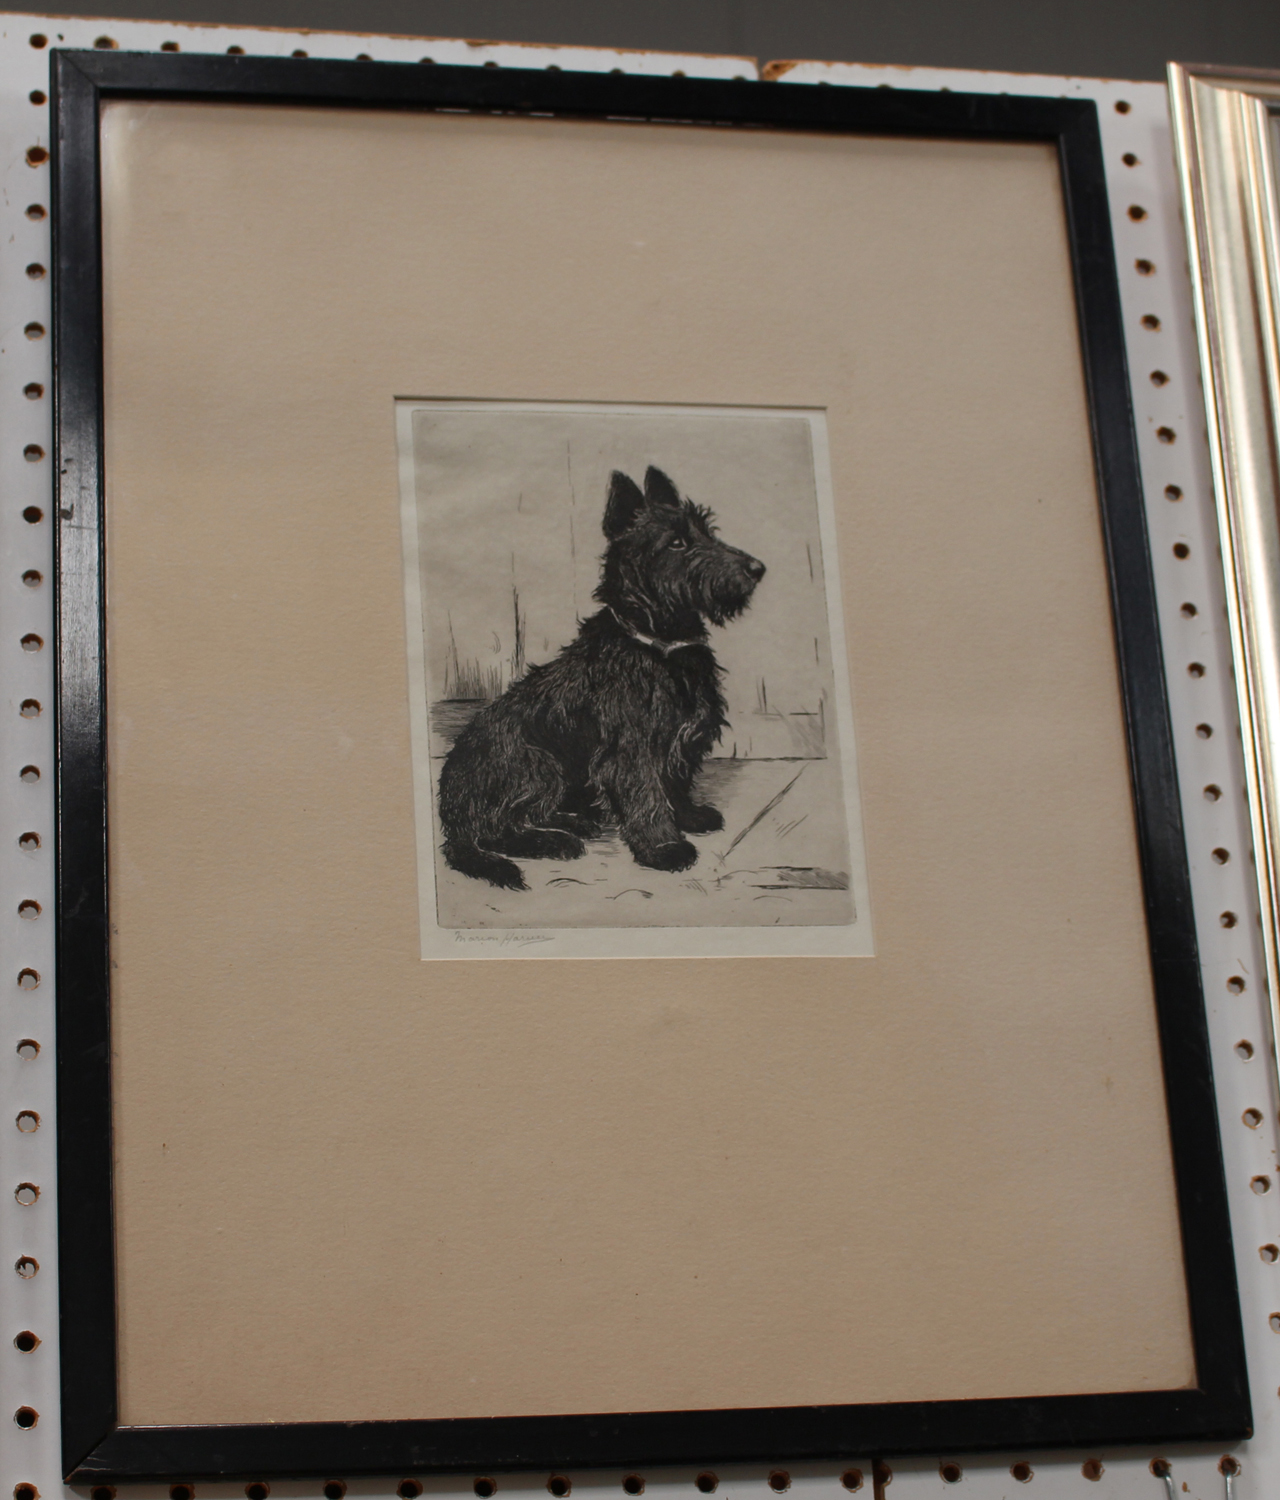 Marion Harvey - 'Where's my Leash?' (Scottish Terrier), early 20th century etching, signed in pencil